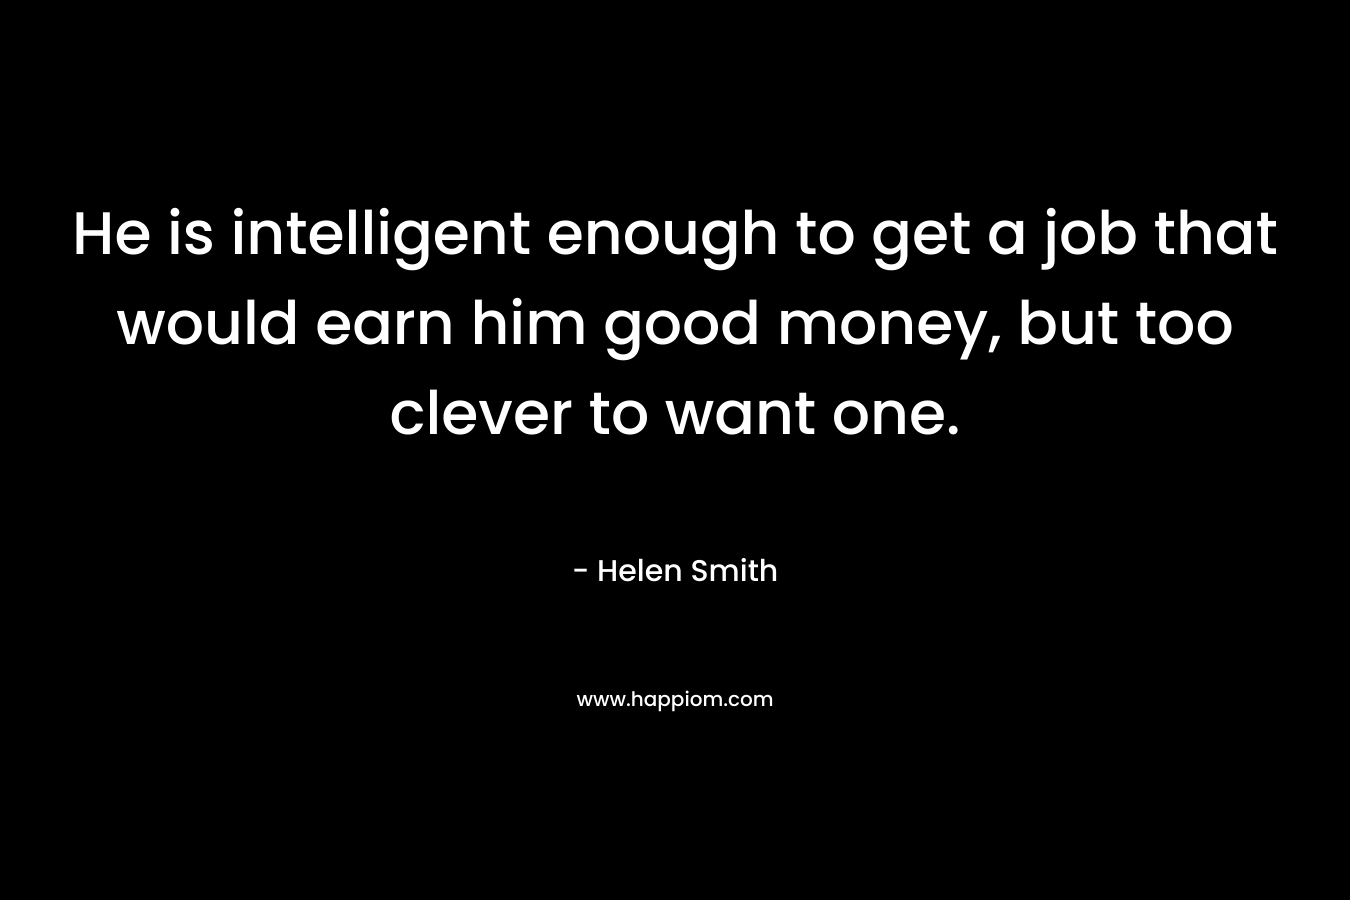 He is intelligent enough to get a job that would earn him good money, but too clever to want one. – Helen Smith